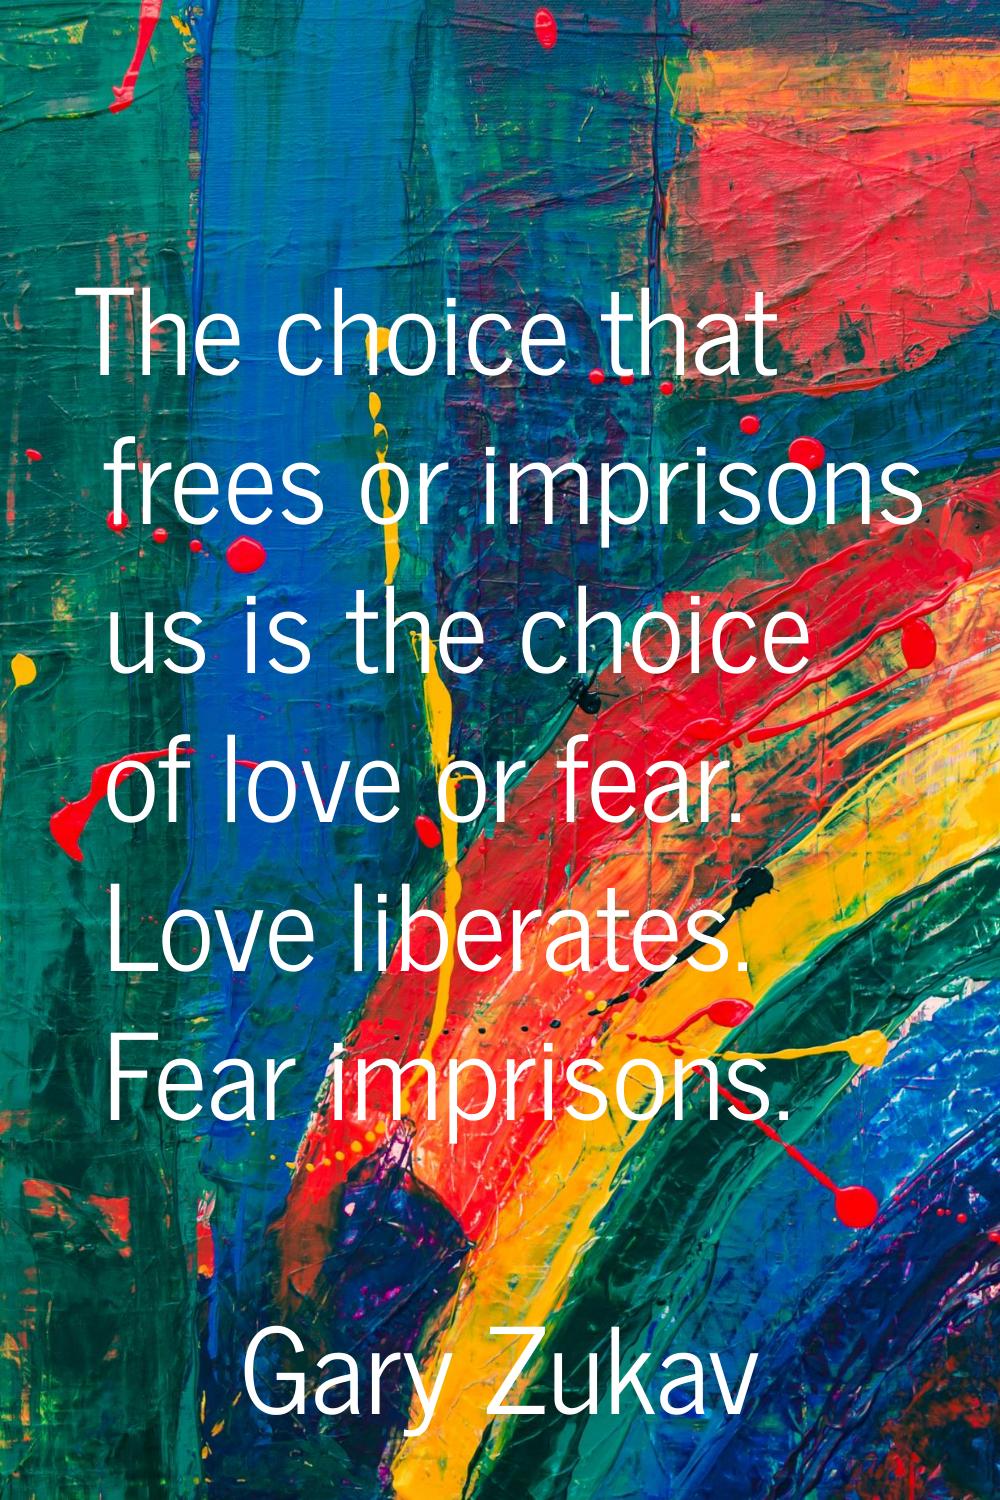 The choice that frees or imprisons us is the choice of love or fear. Love liberates. Fear imprisons